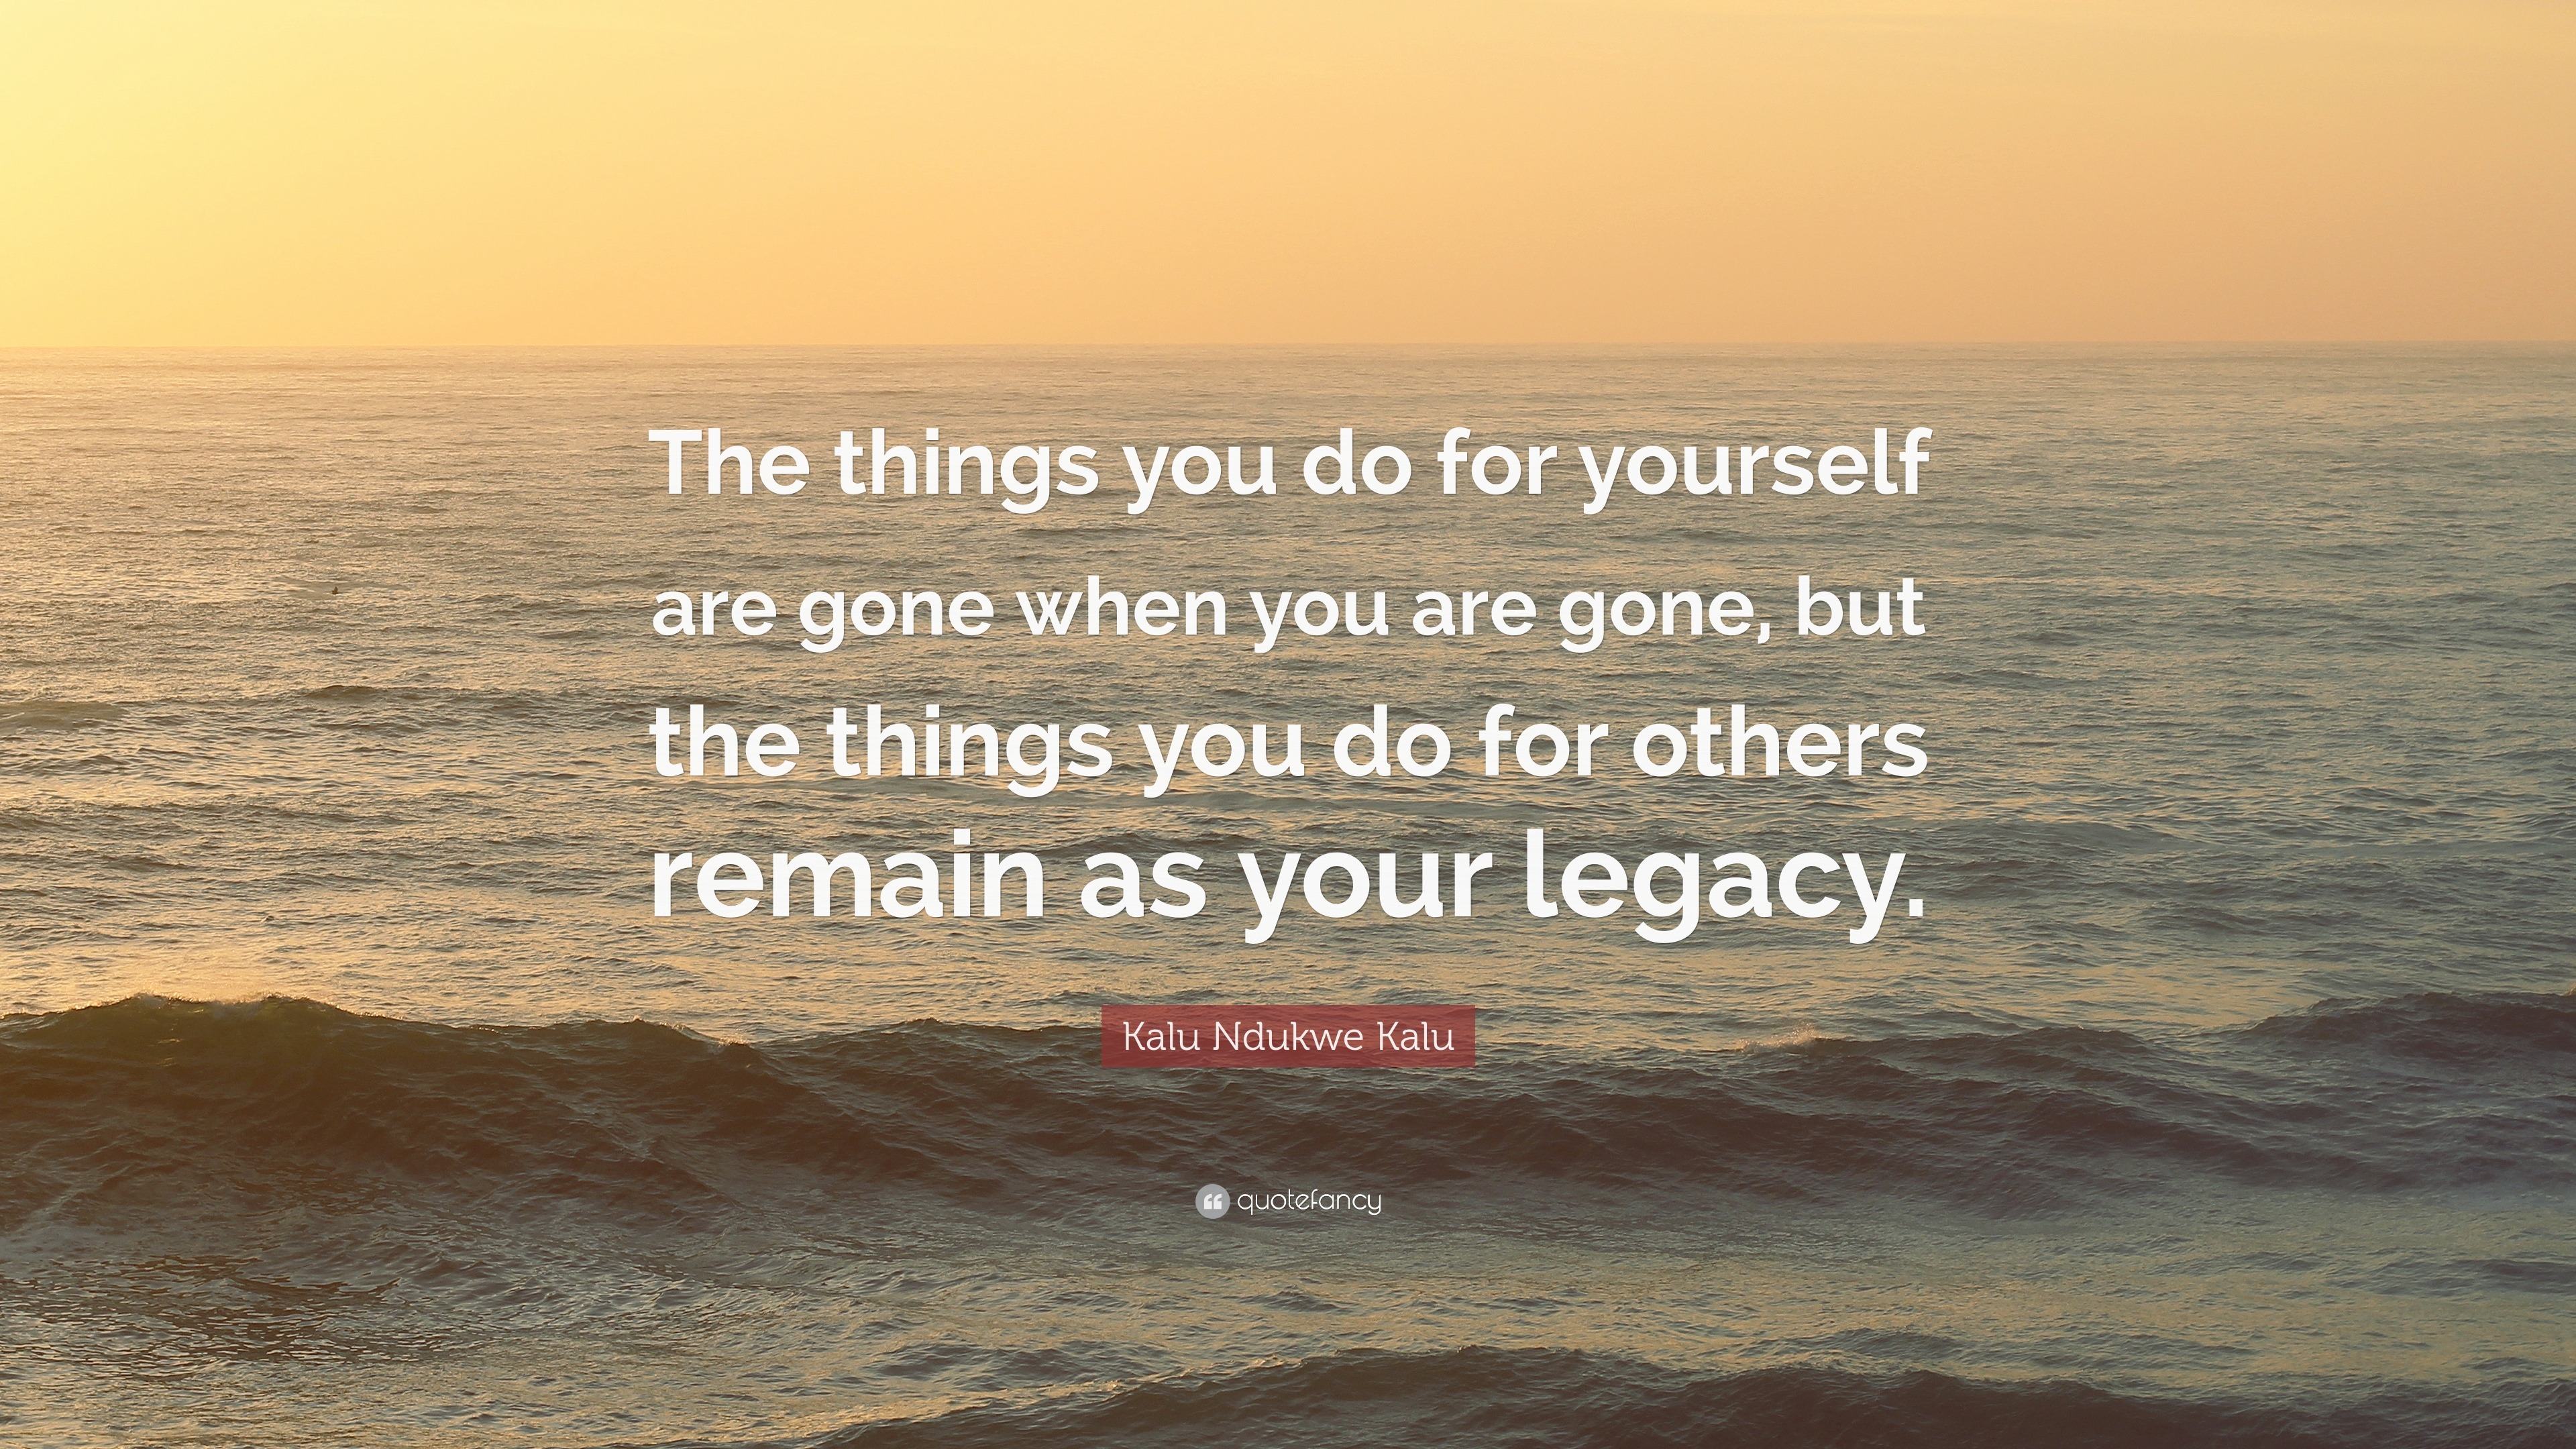 Kalu Ndukwe Kalu Quote: “The things you do for yourself are gone when ...